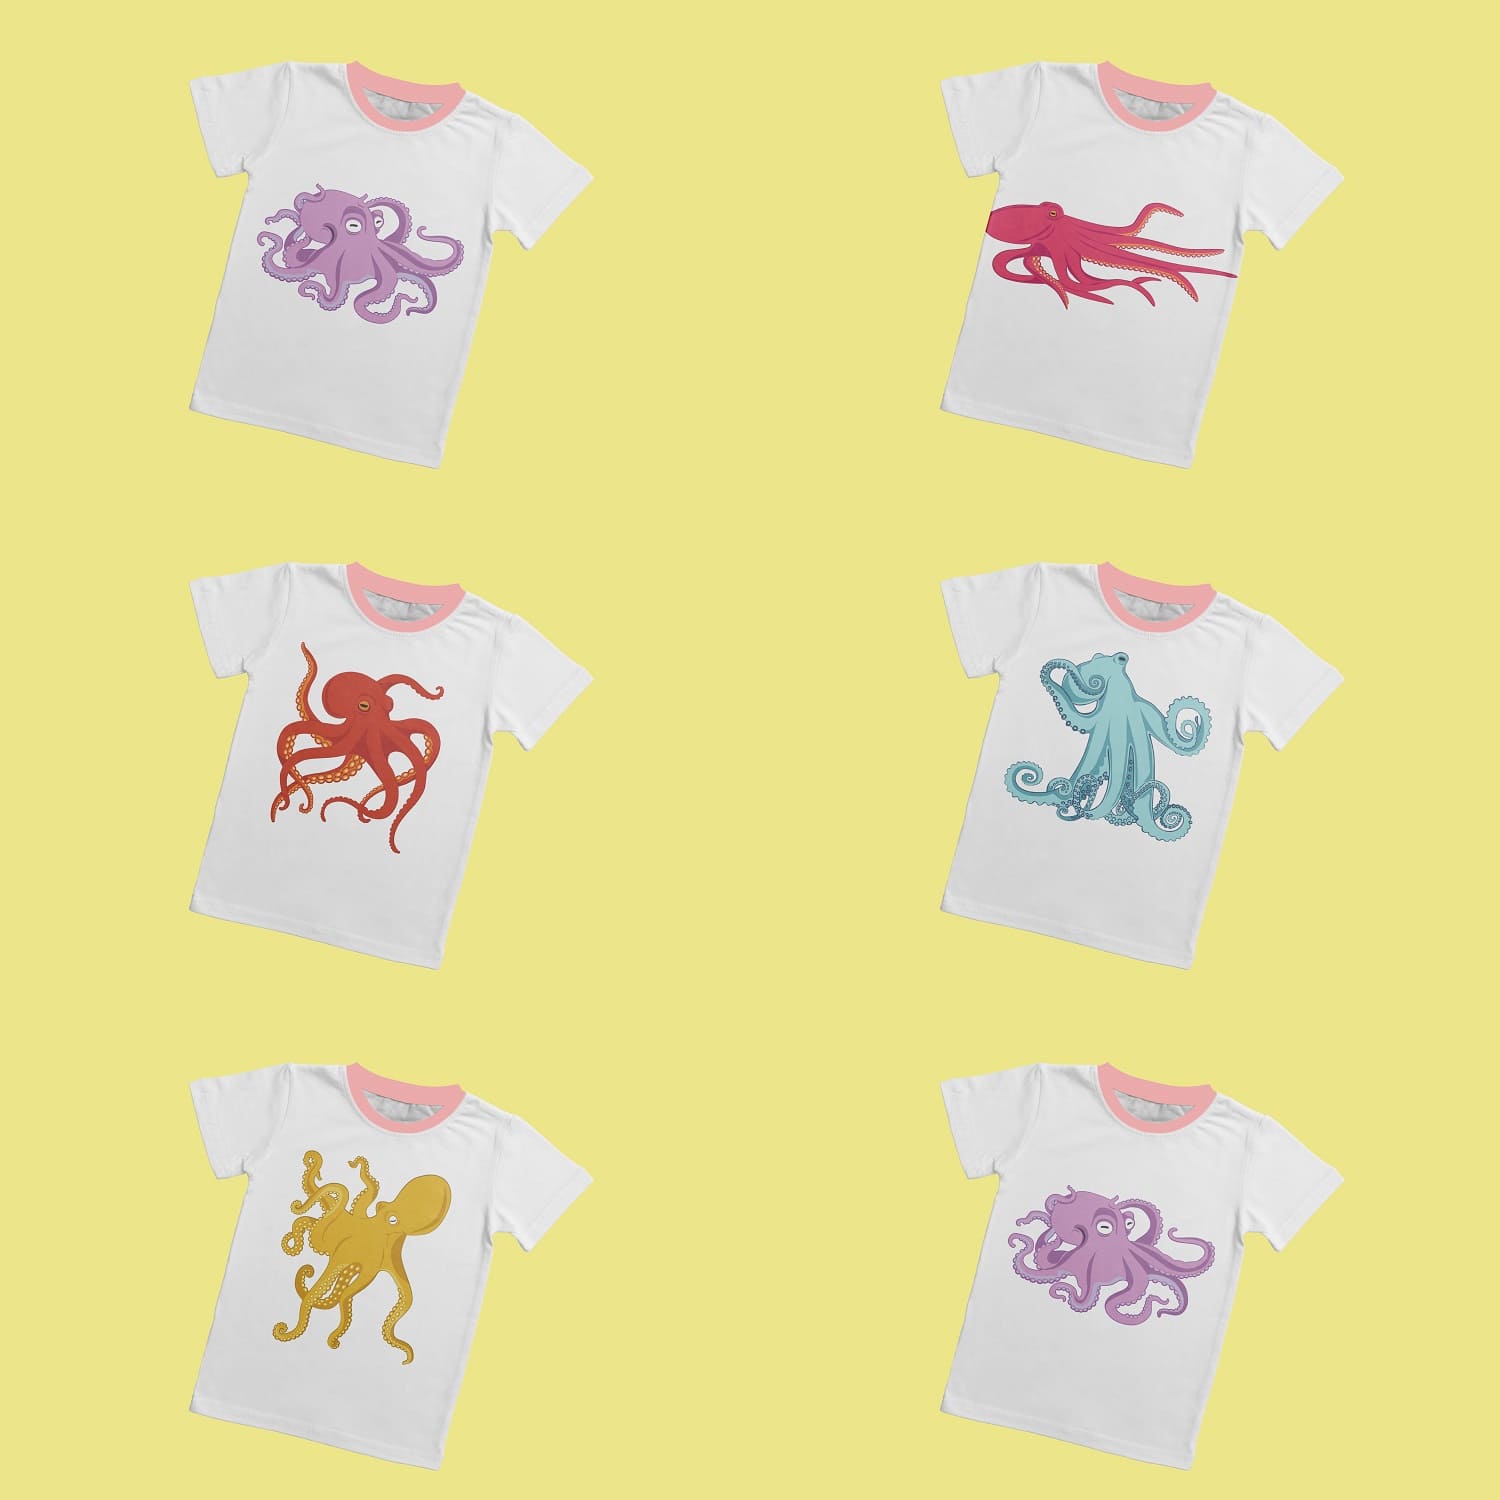 A set of six t-shirts featuring colorful octopuses on a yellow background.